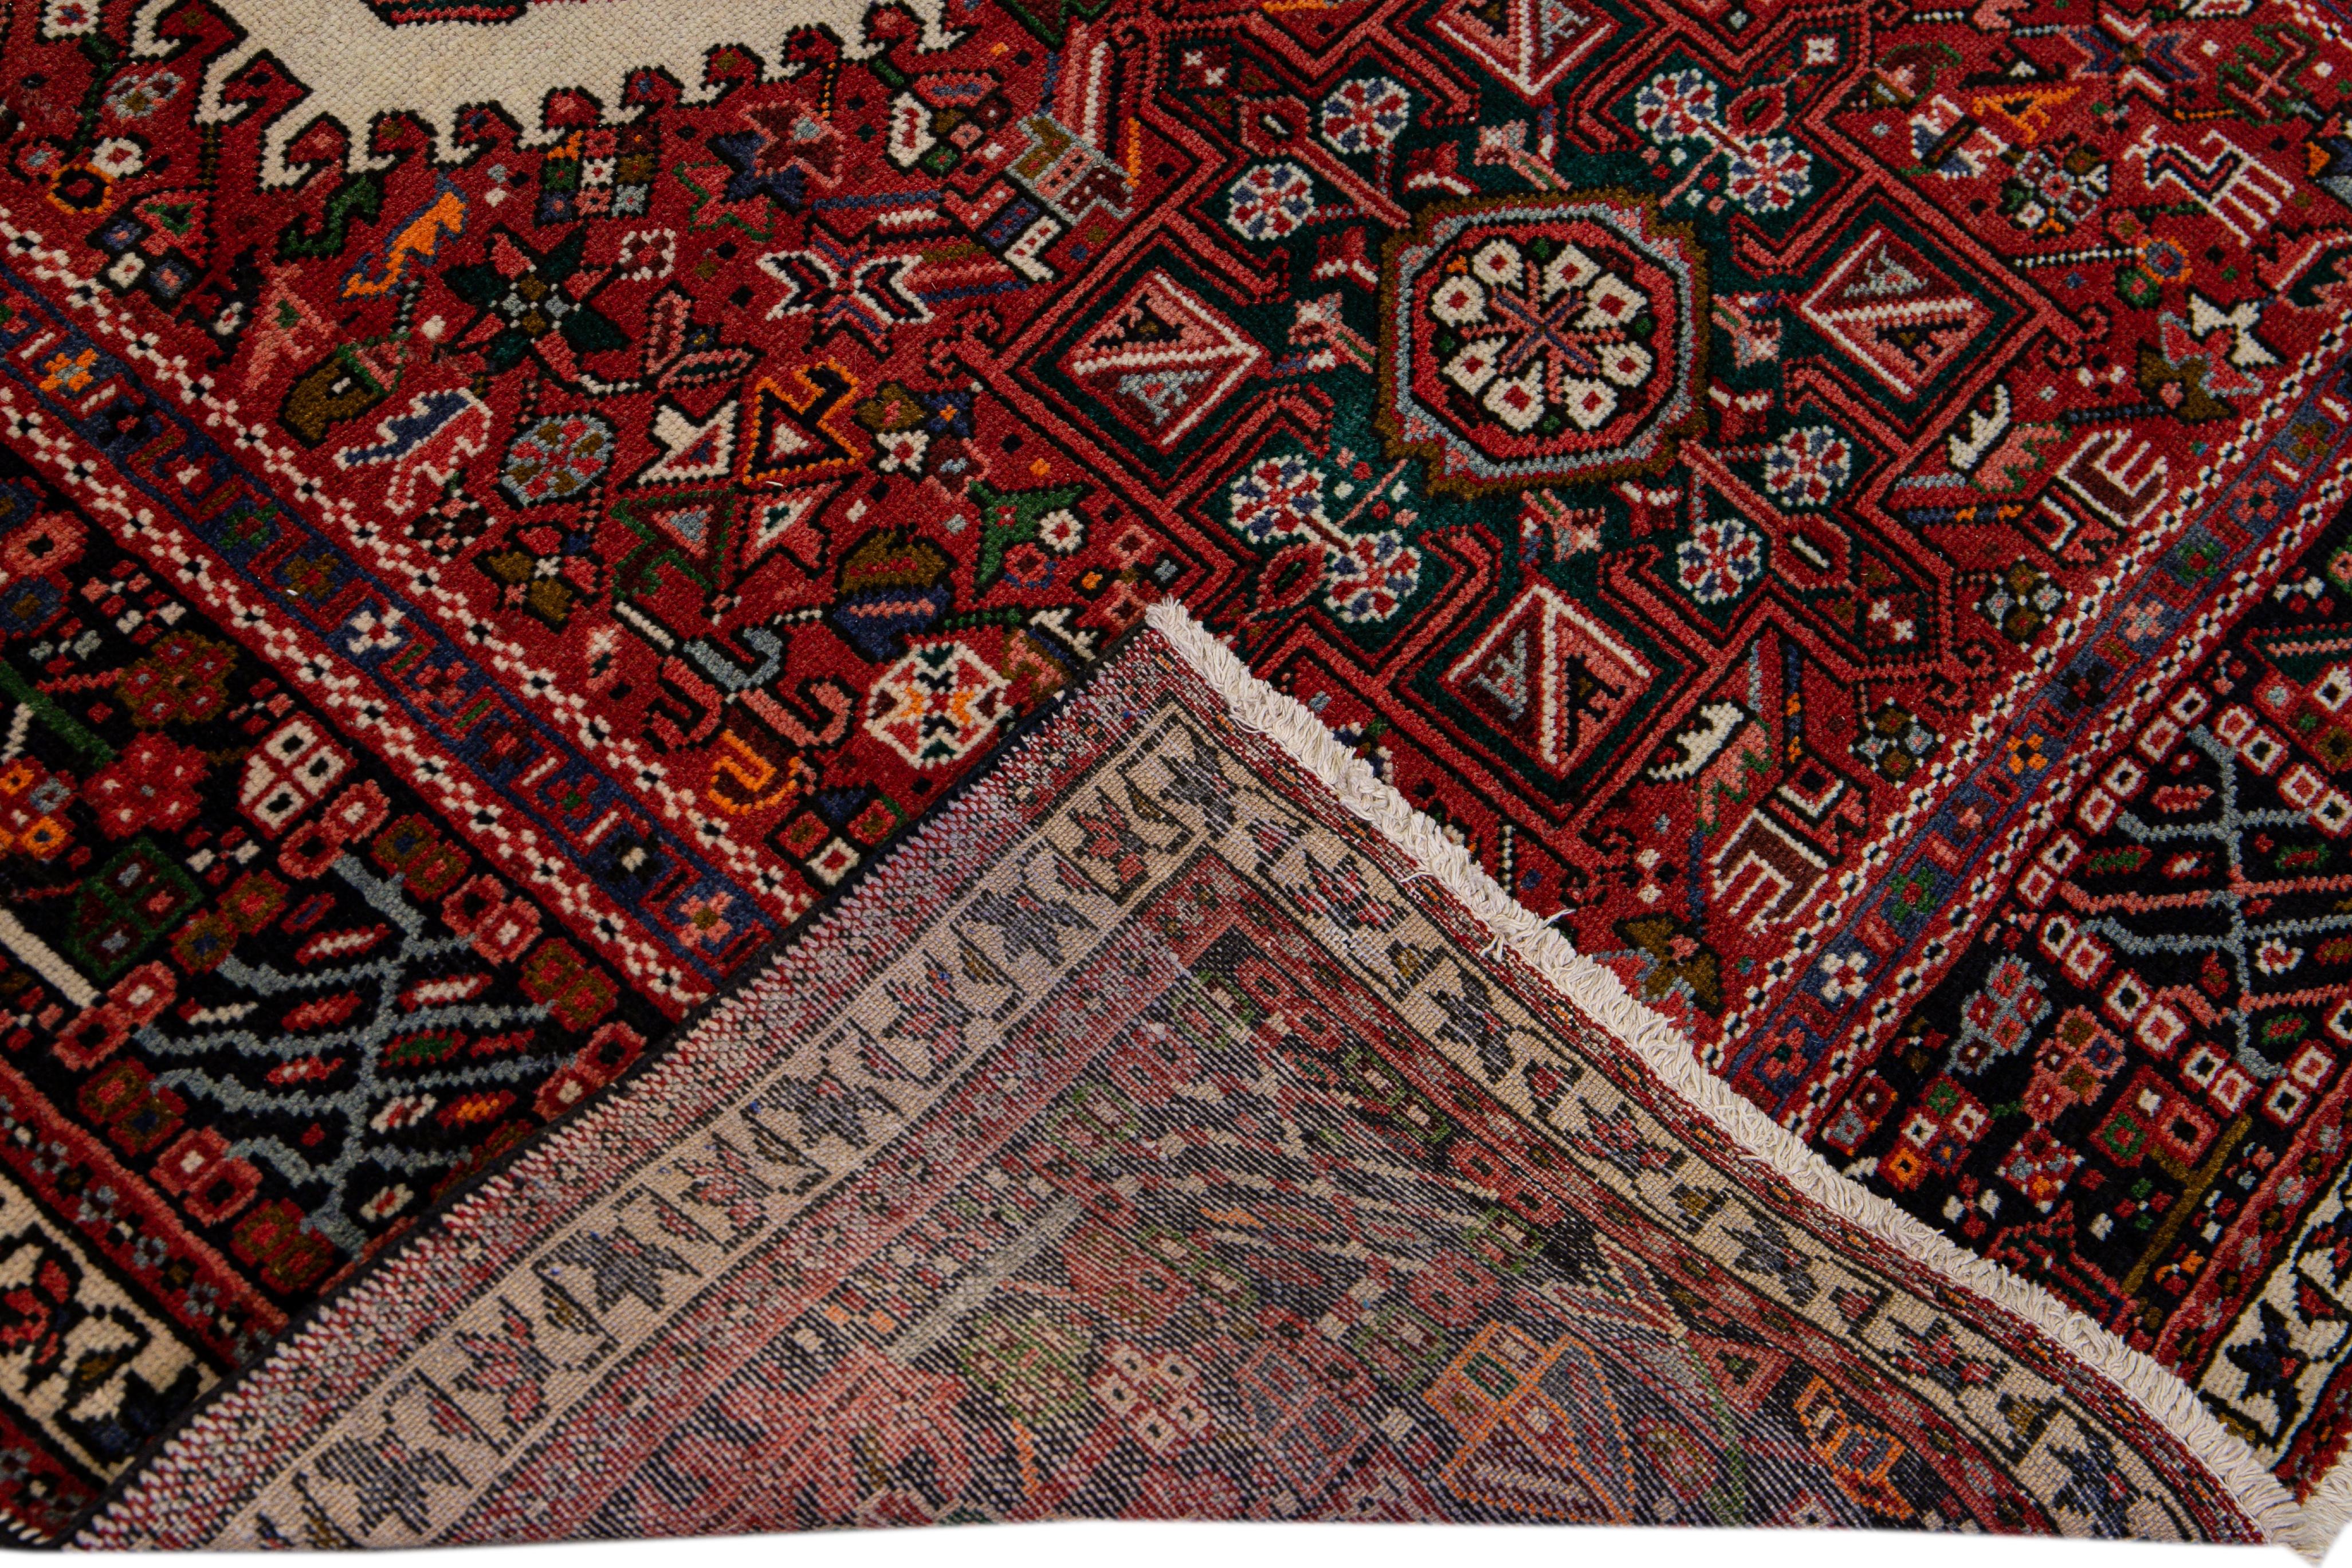 Beautiful antique Persian Heriz runner with a multi-medallion motif on a red color field. This piece has a navy-blue border and multicolor accents all over the geometric design.

This rug measures 4'10